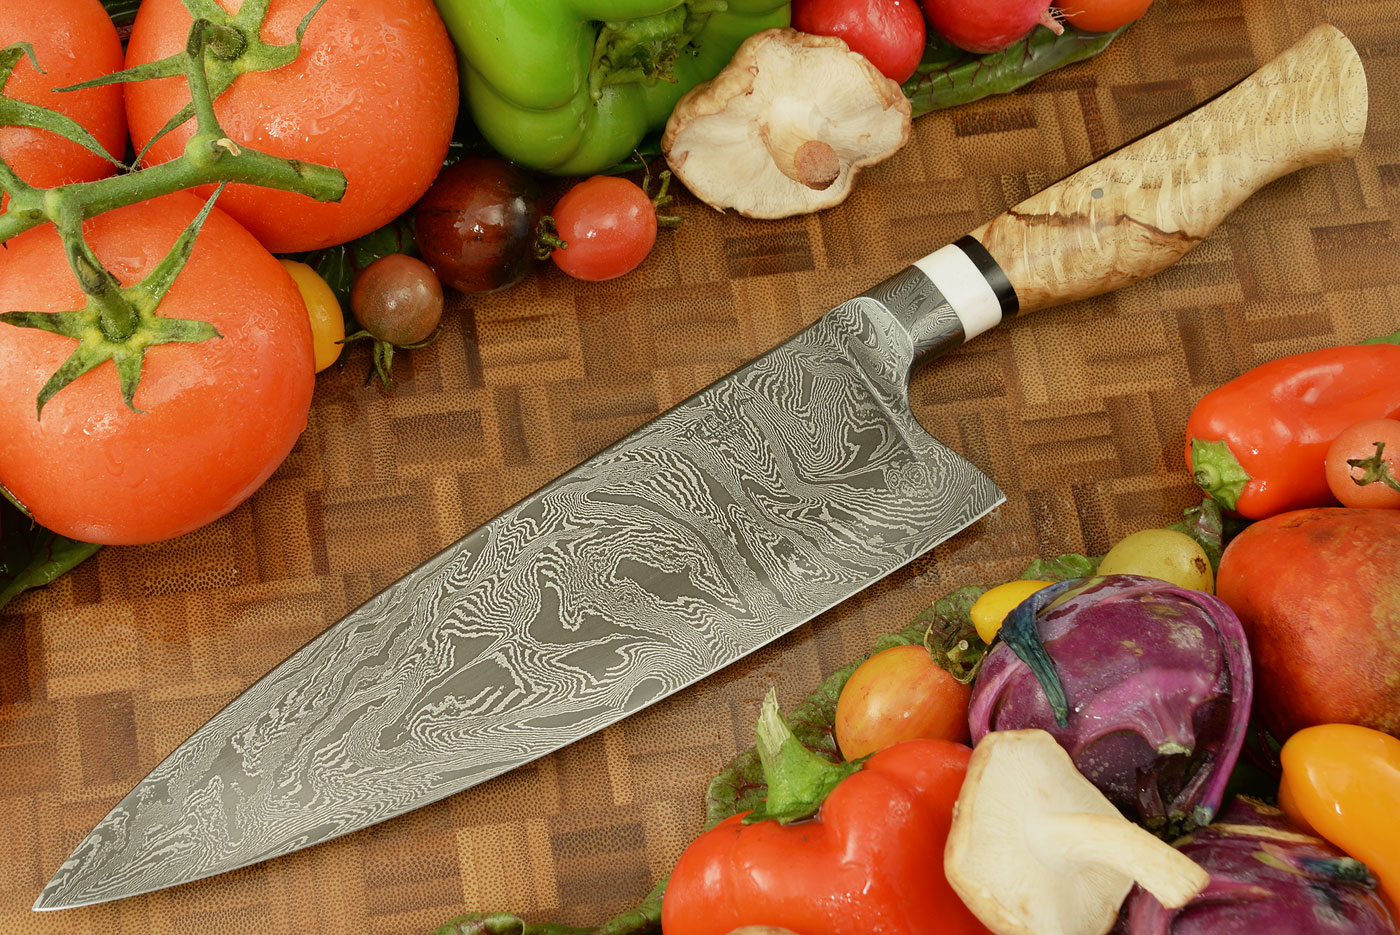 Integral S-Grind Damascus Chef's Knife (9 inches) with Dyer Oak Burl